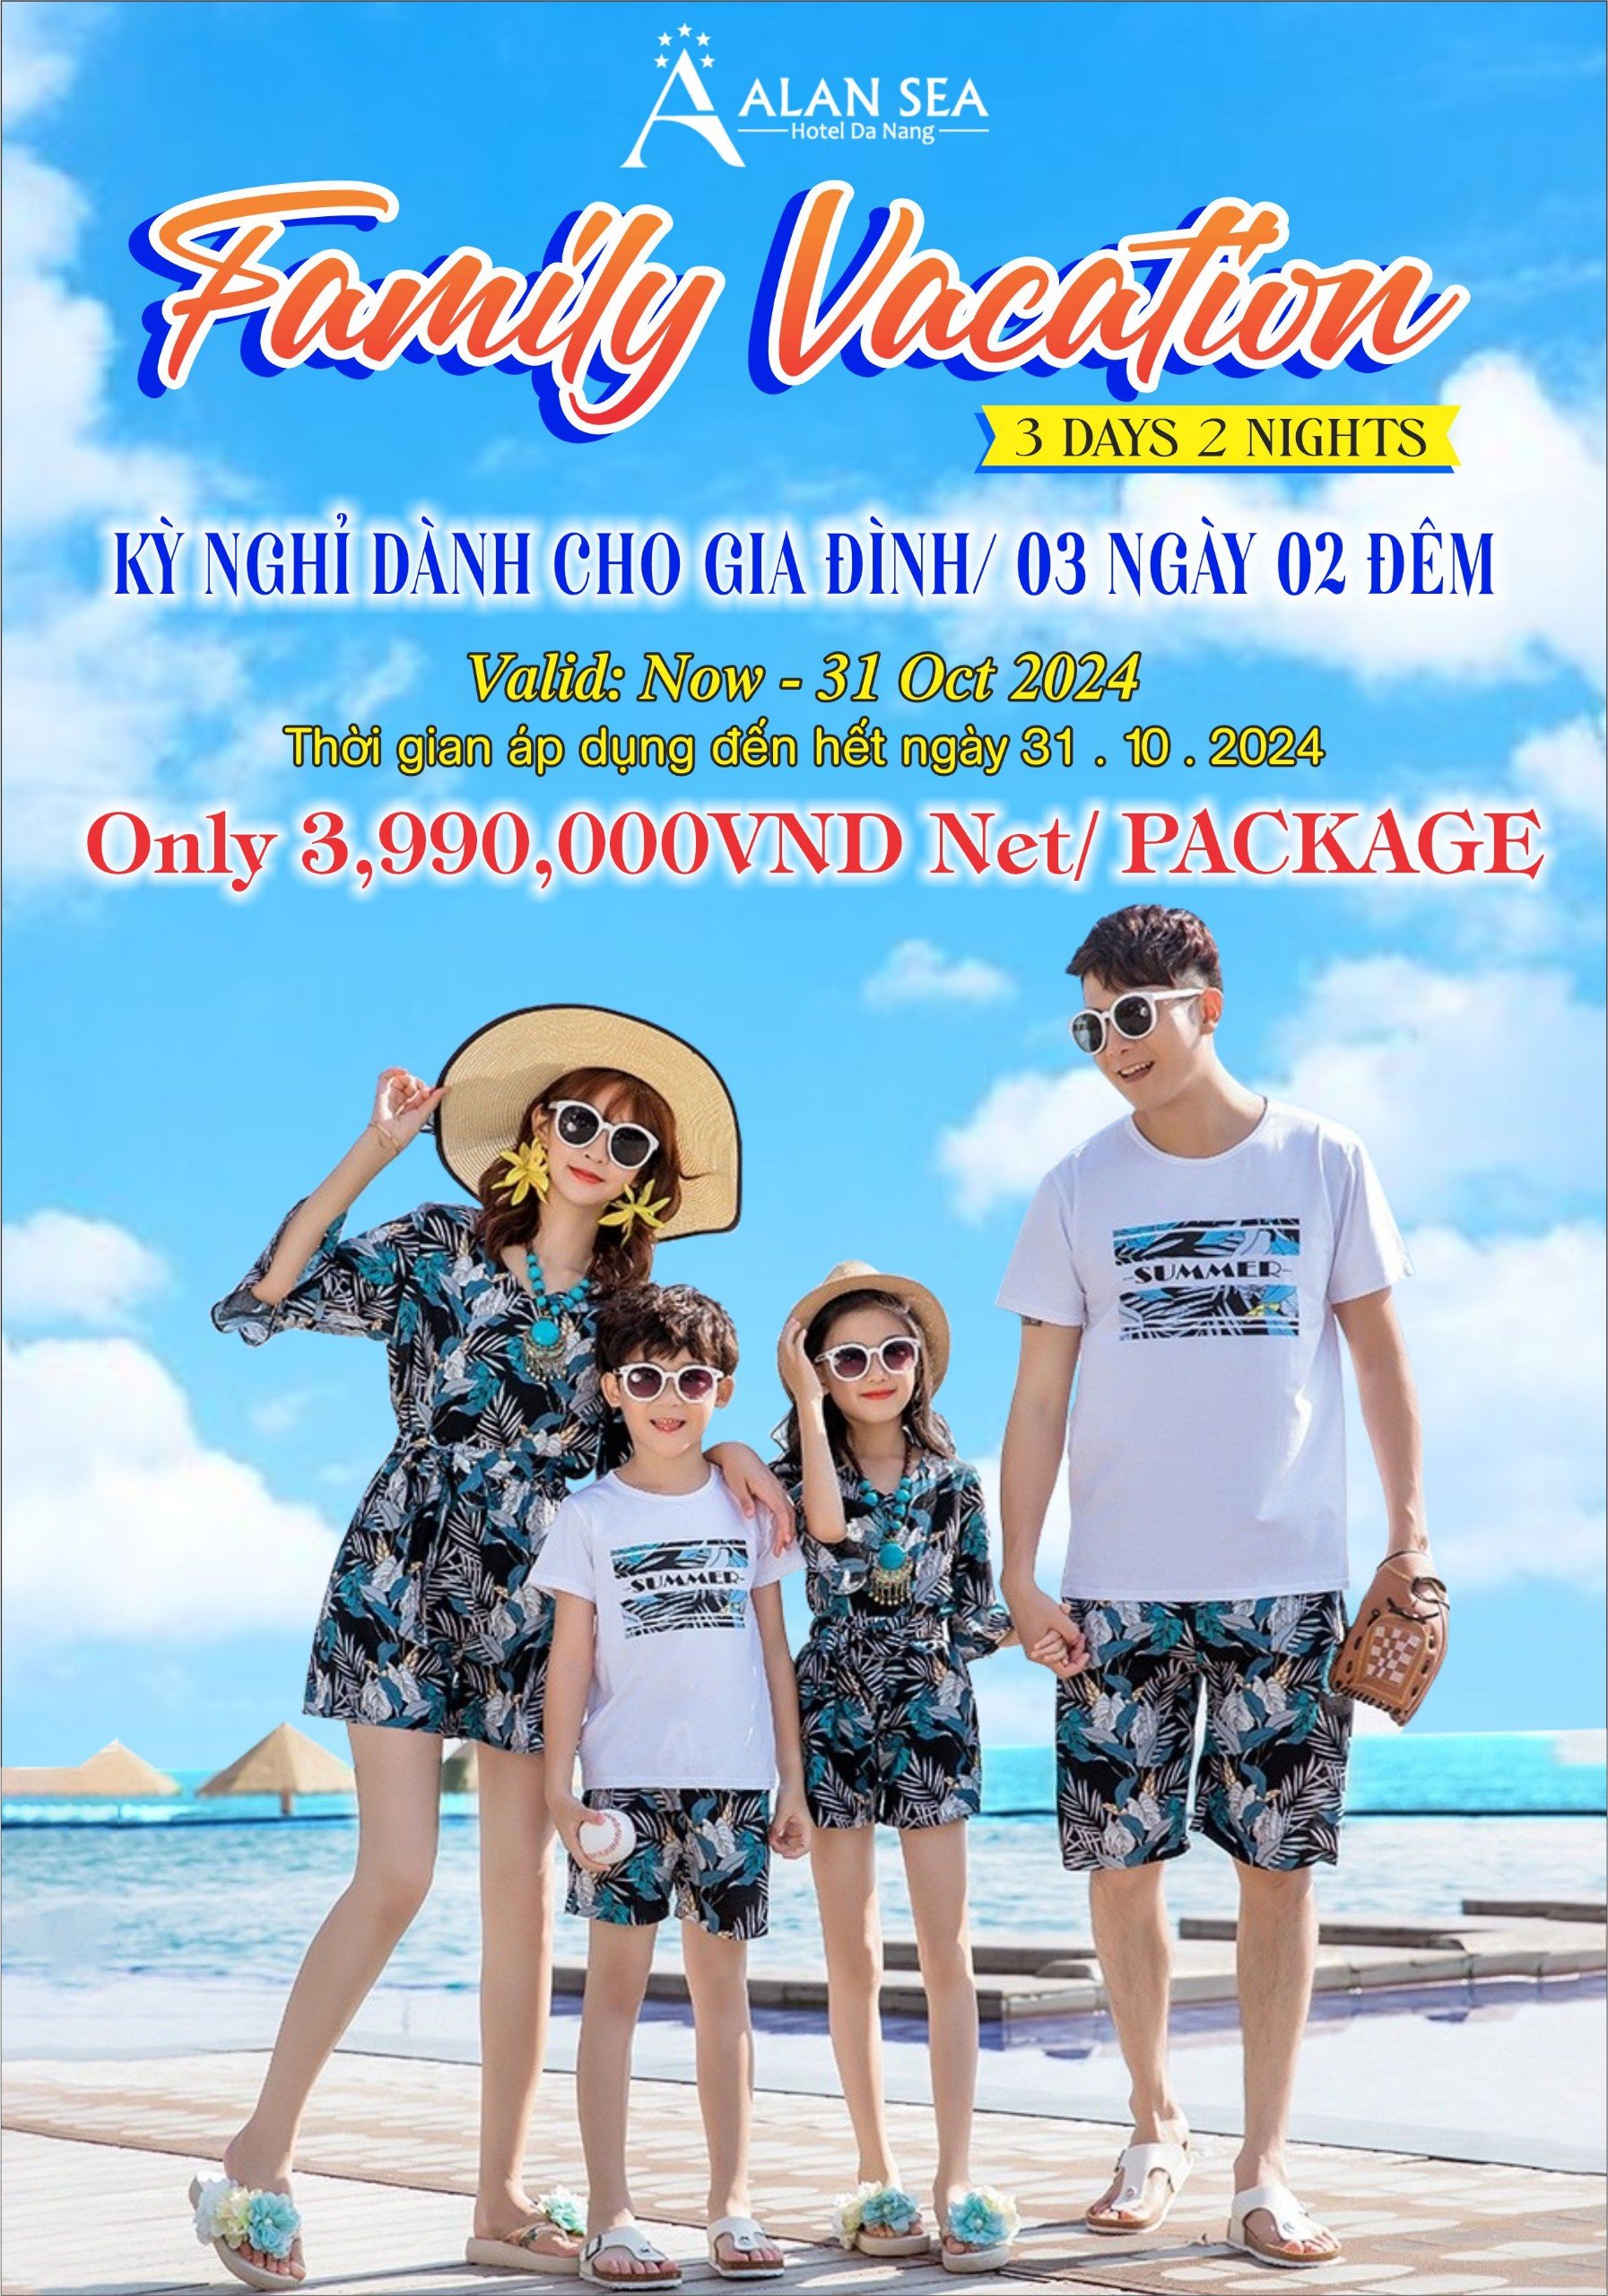 FAMILY VACATION PACKAGE  (3 DAYS/2 NIGHTS) AT VND3,990,000